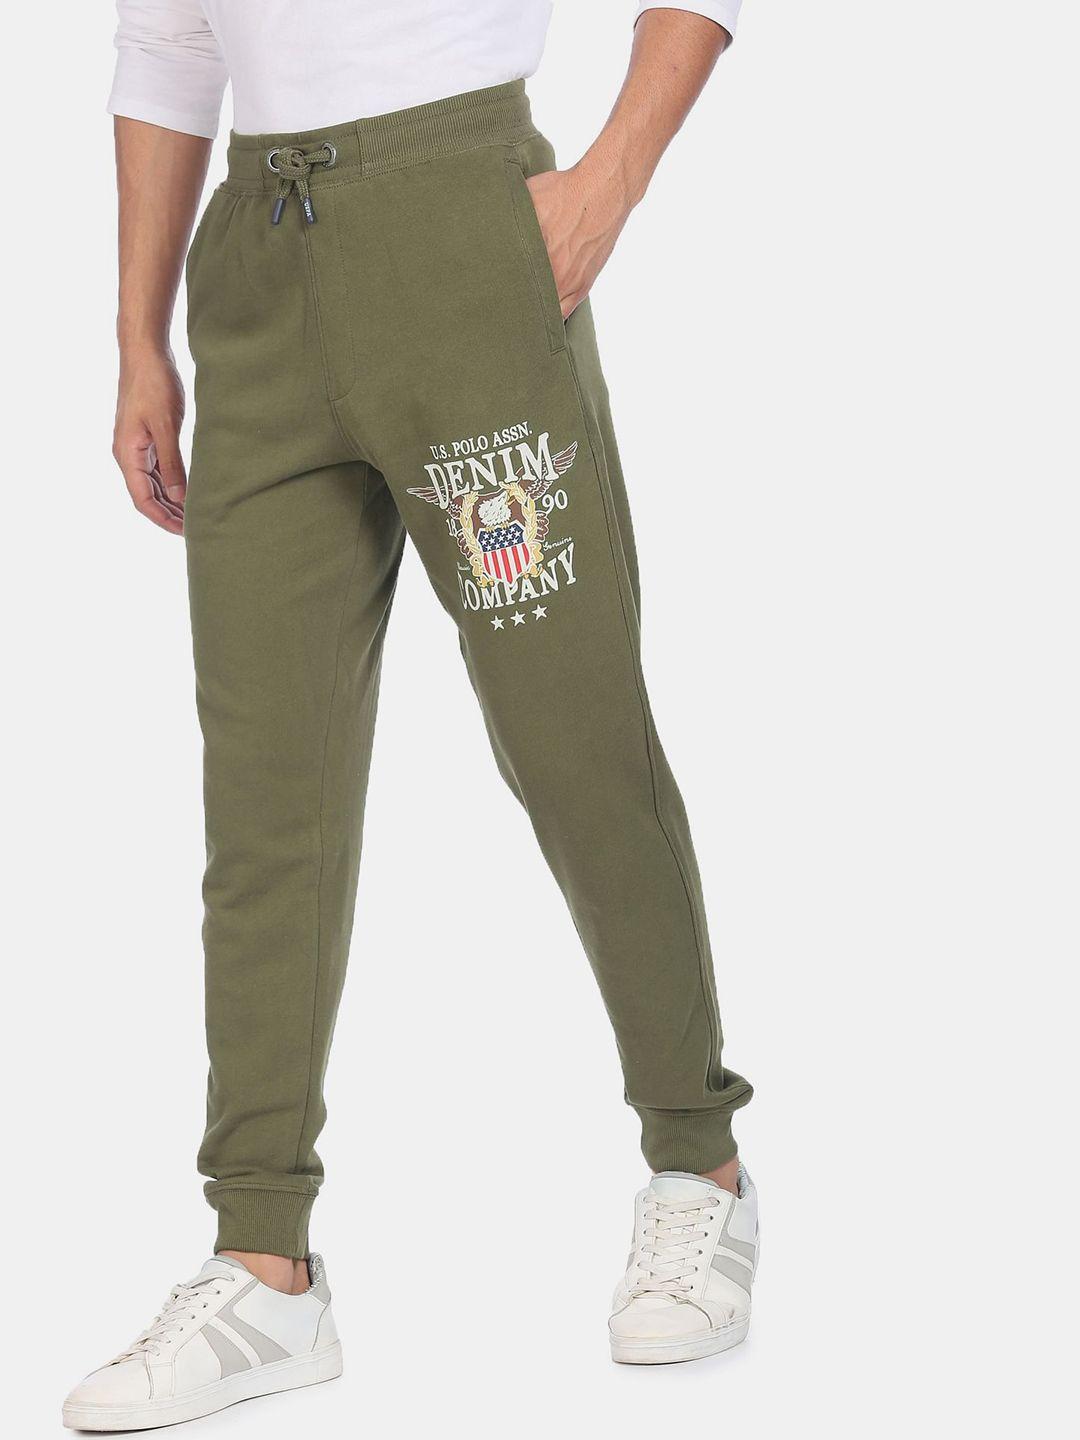 u.s.-polo-assn.-denim-co.-men-olive-green-solid-straight-fit-joggers